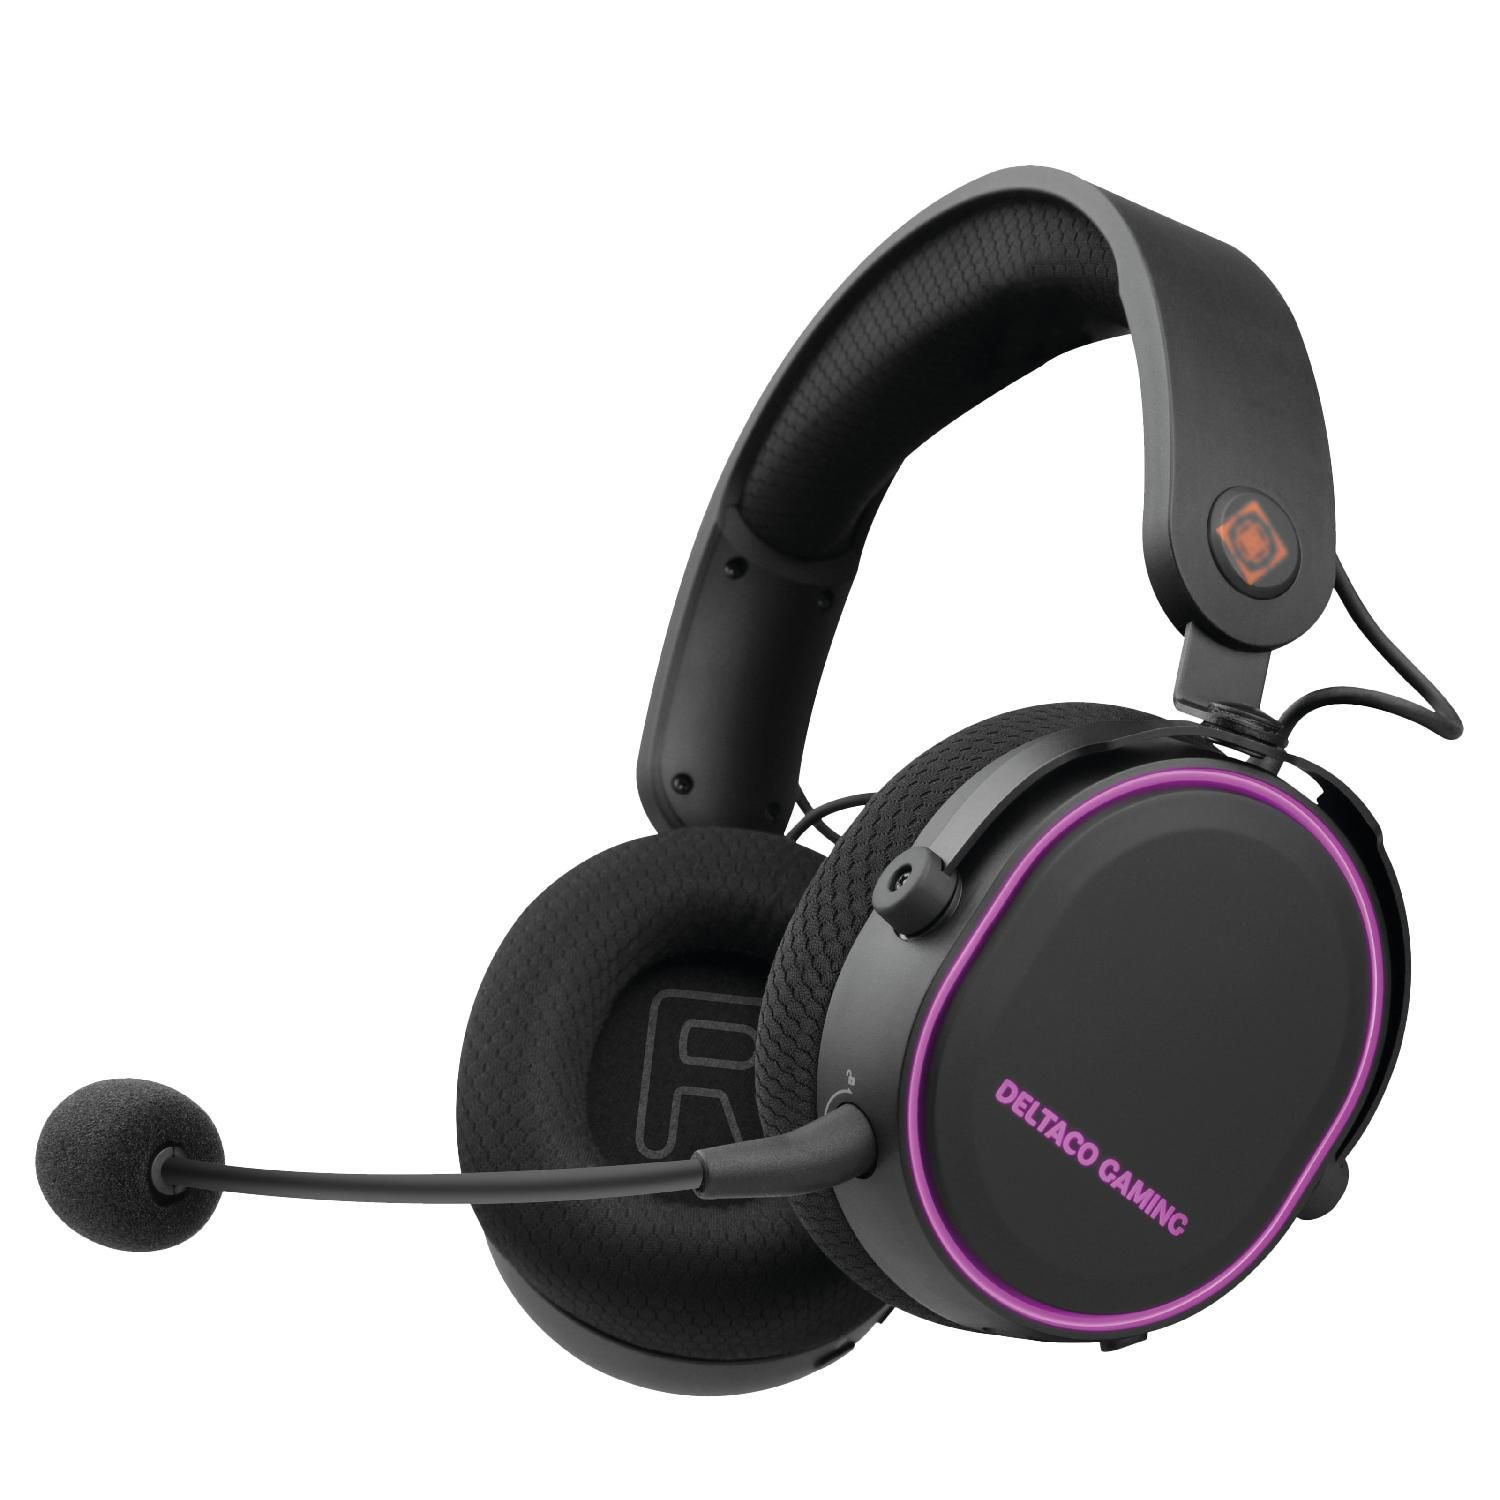 DELTACO GAMING schwarz DH420, Headset Over-ear